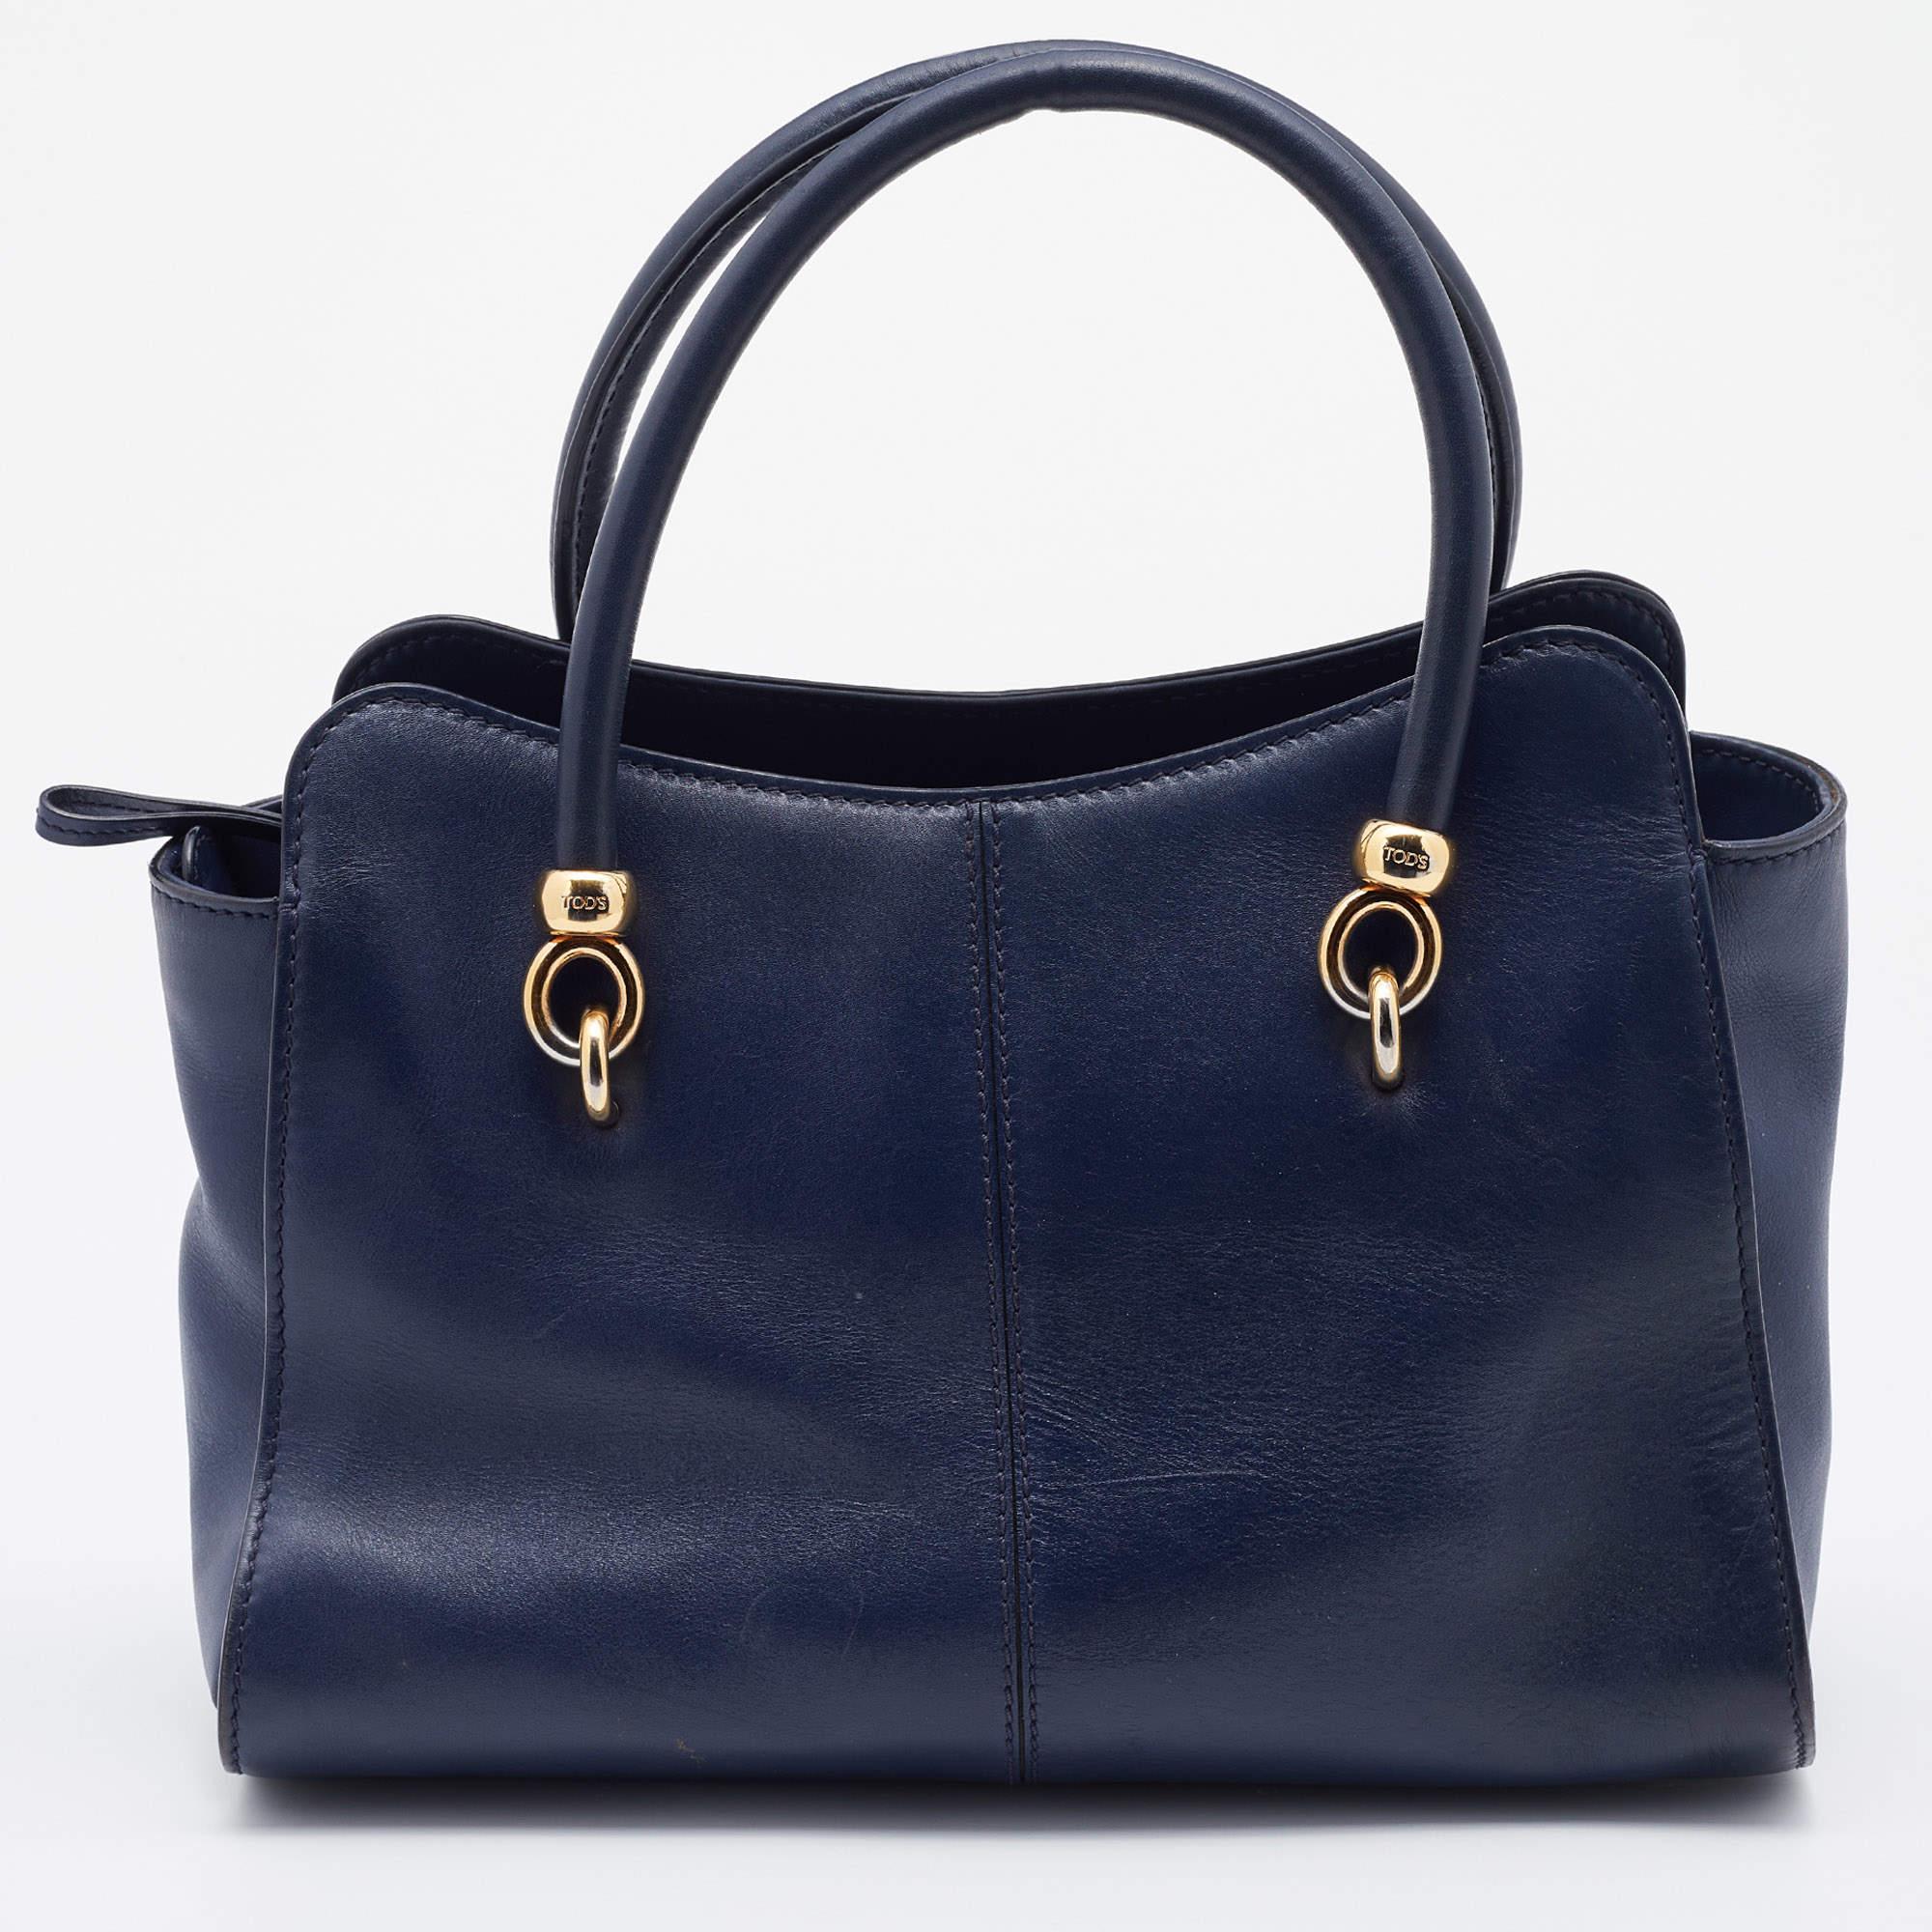 Put through a rigorous process of the finest stitching, this Sella by Tod's is brought to you with love. On its leather body, there are neat stitching details running in perfect symmetry, two shapely handles on top, and a fabric interior secured by